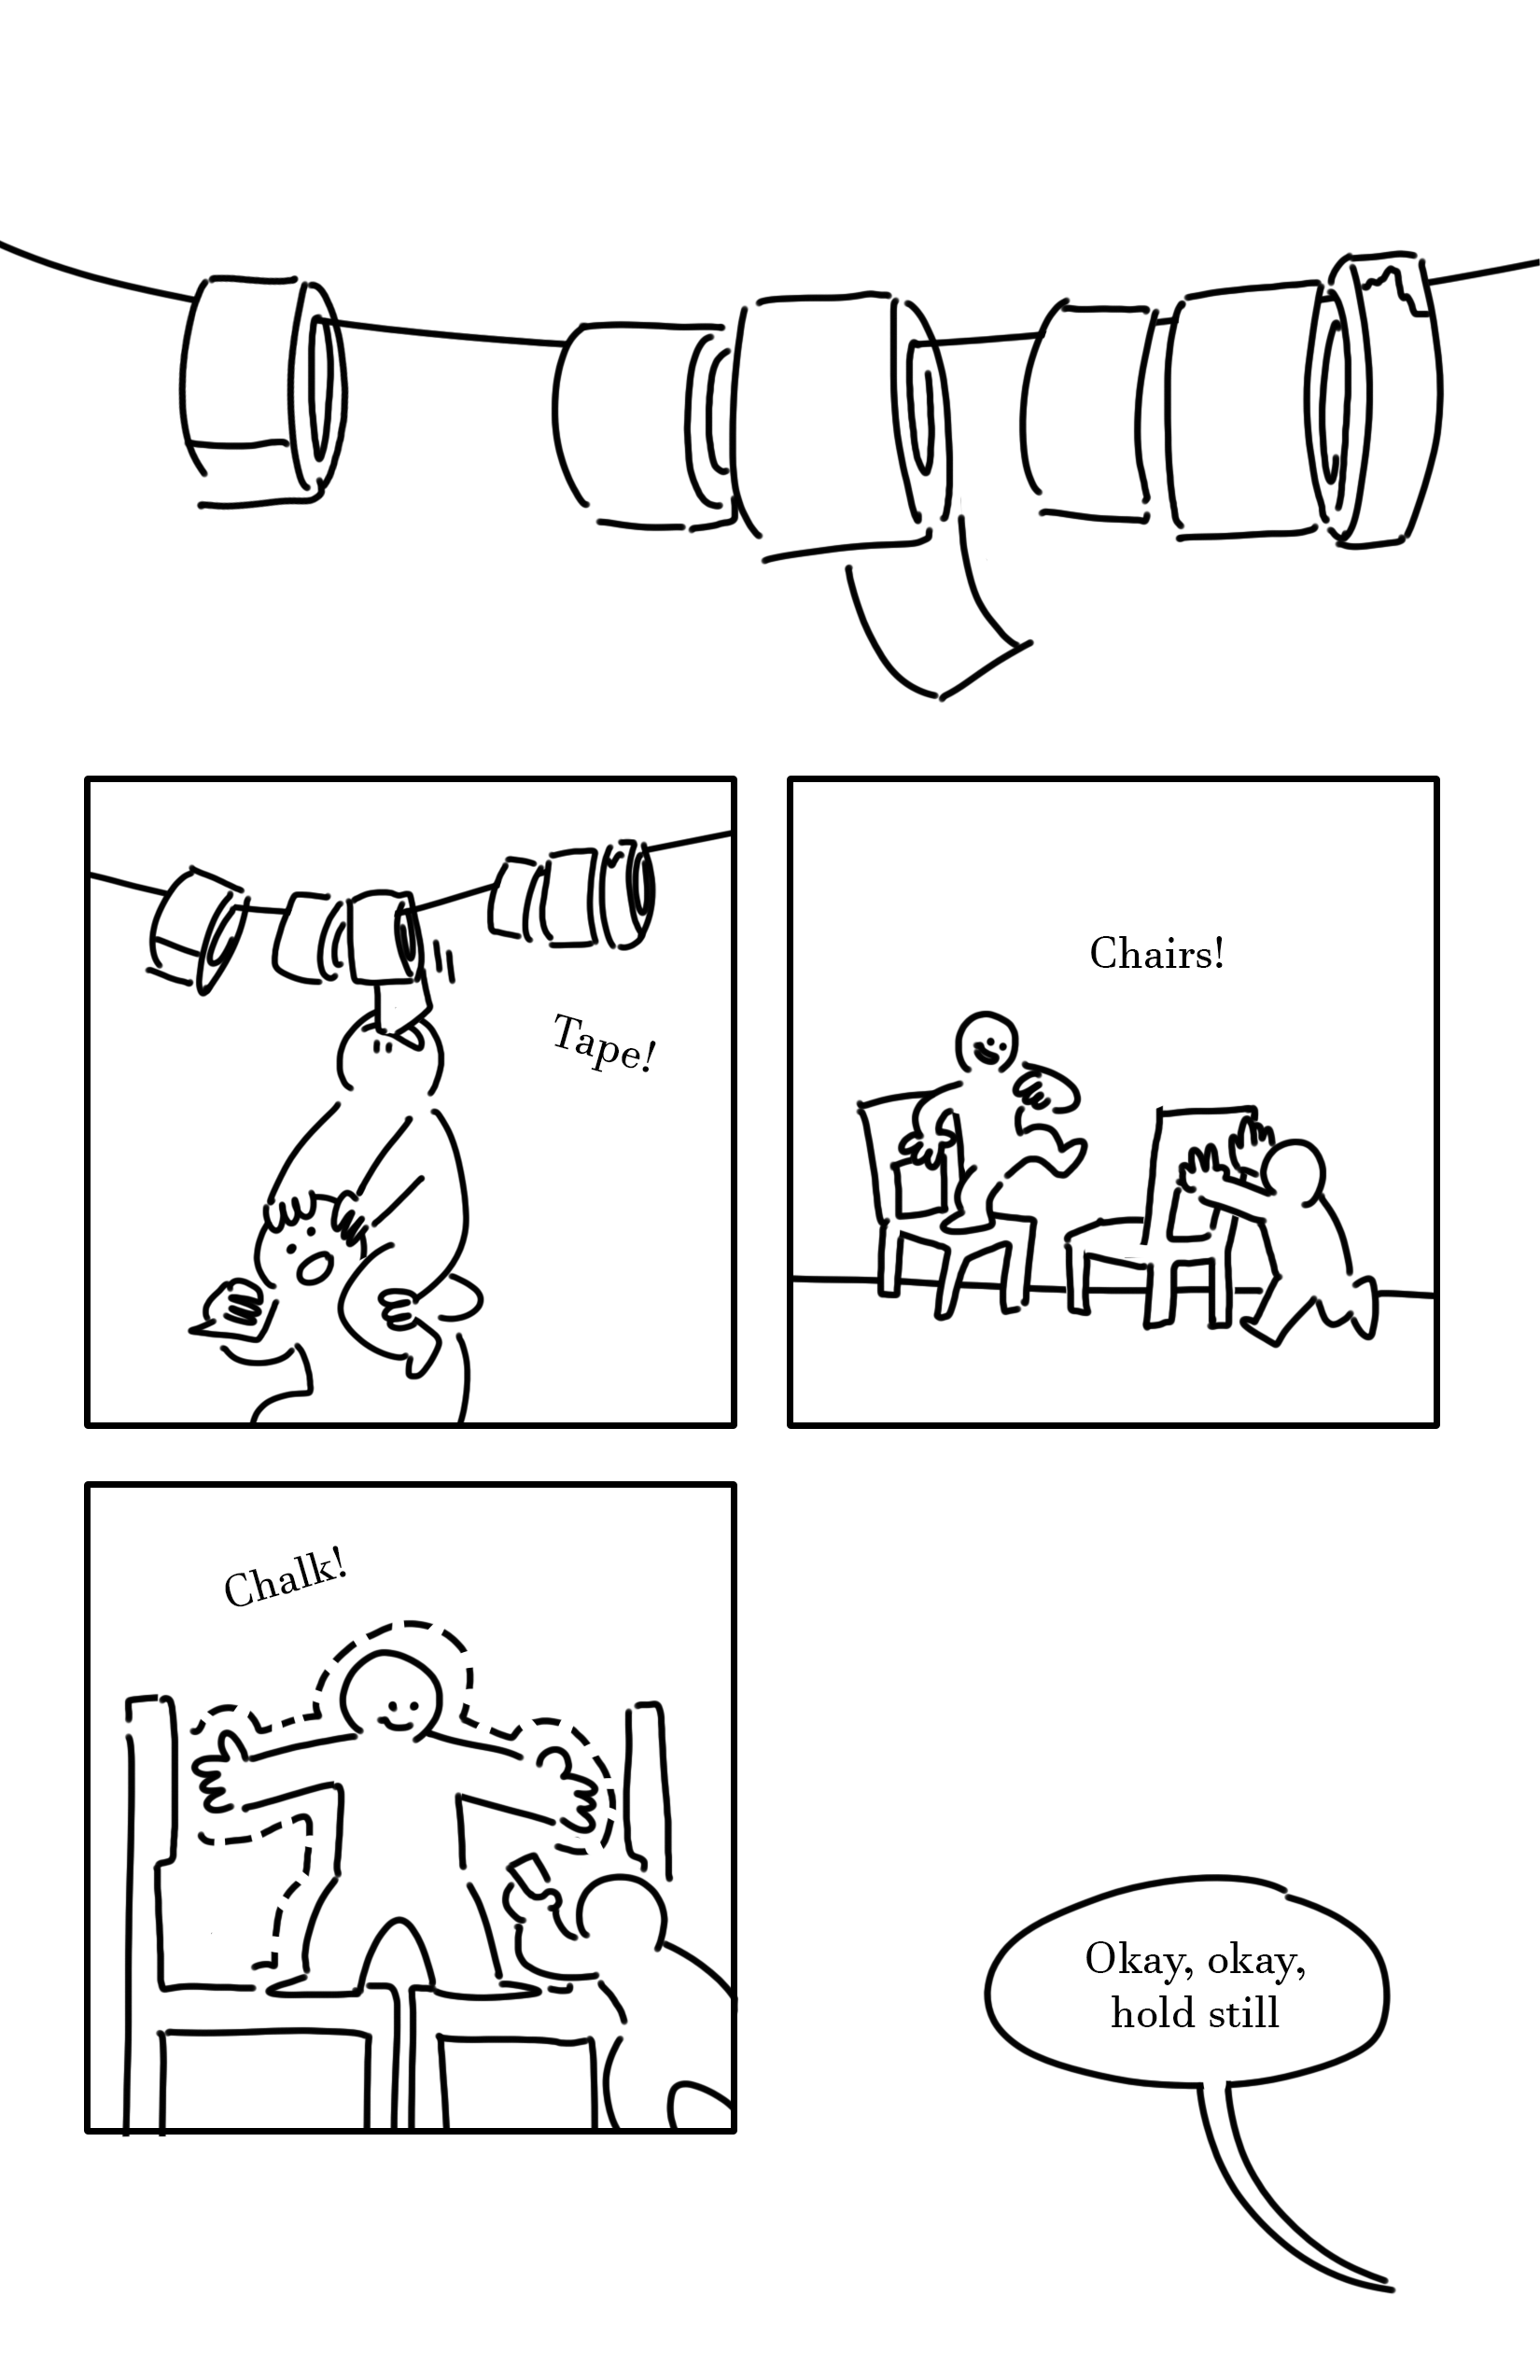 Black and white comic with simple digital drawings.
Panel 1: A row of tape rolls hung on a string. They are varying in sizes and thickness. One near the middle has its strip of tape dangling.
Panel 2: A kid sitting on another kid's shoulders, pulling at the edge of the tape with their mouth.
Text: Tape!
Panel 3: The kid on the left stands on one chair on one leg, smiling. The kid on the right pushes a second chair so that it's under the other kid's foot.
Text: Chairs!
Panel 4: The kid on the left stands with a foot on each chair and their arms spread. They smile as the kid on the right draws a dotted line around them with a piece of chalk.
Text: Chalk!
Speech bubble pointing to the bottom right corner of the page: Okay, okay, hold still